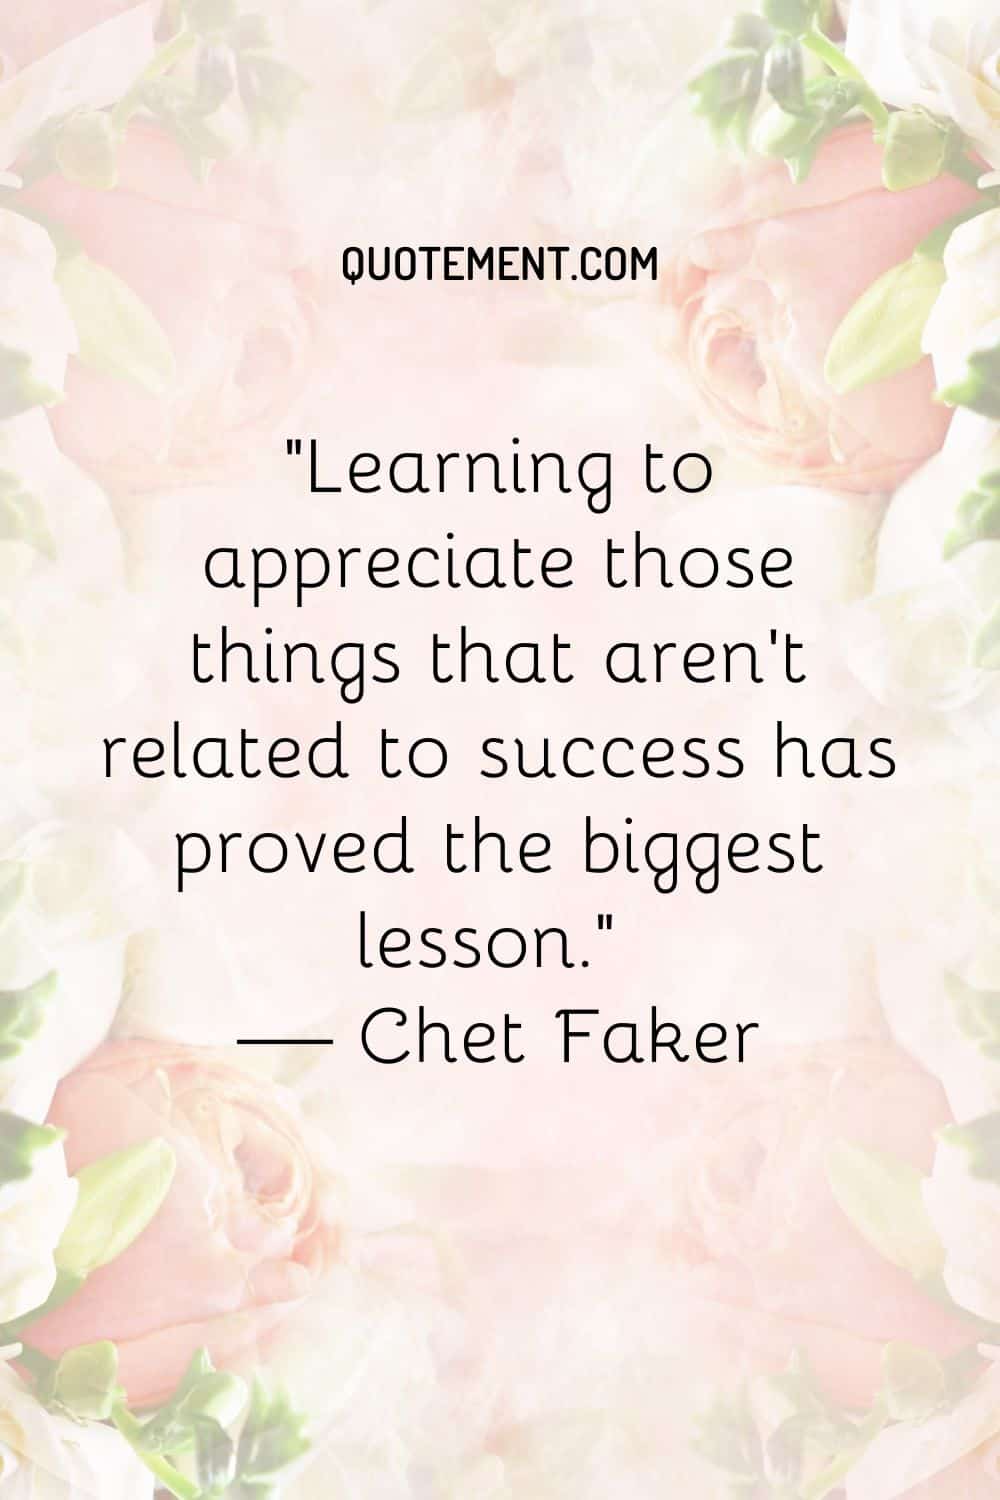 Learning to appreciate those things that aren’t related to success has proved the biggest lesson